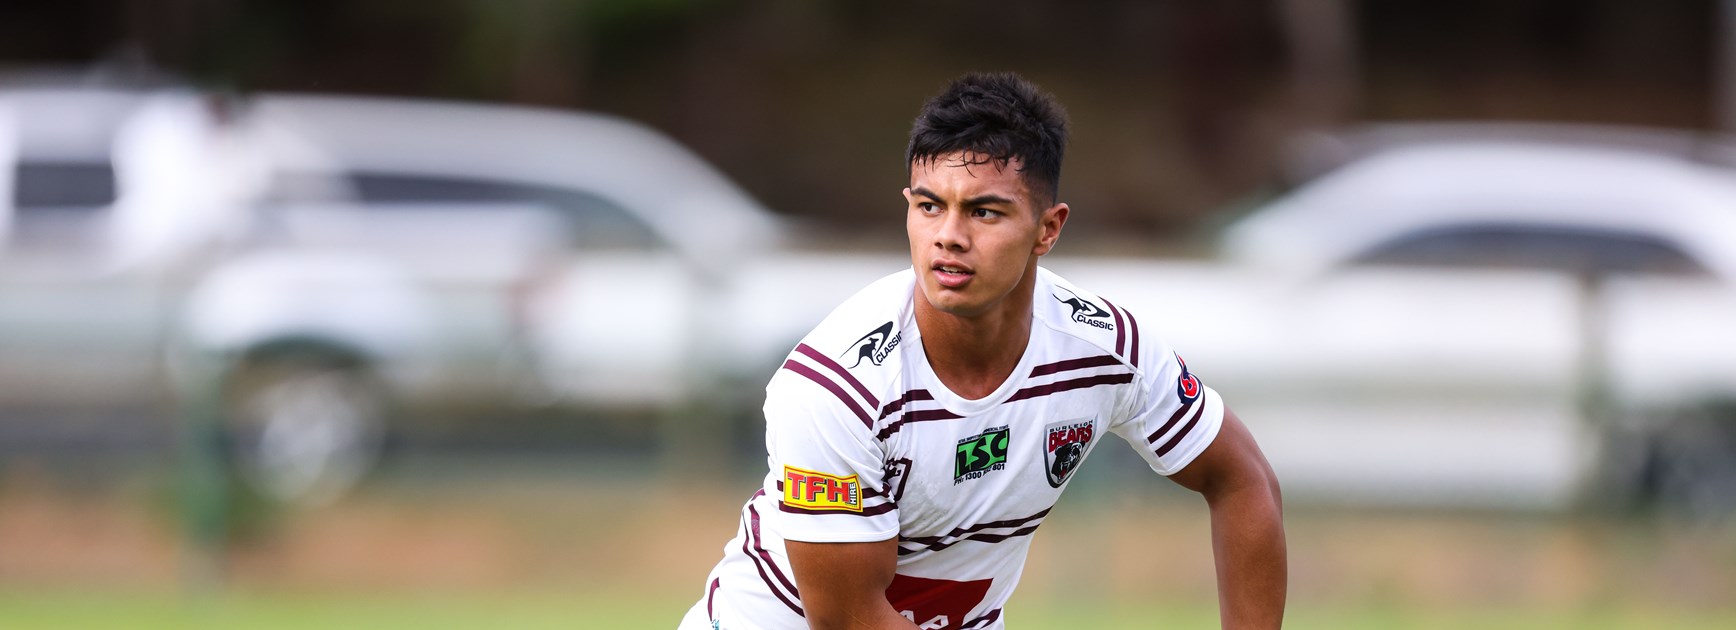 Round 15 Team of the Week: Young cub Kini fires for Bears